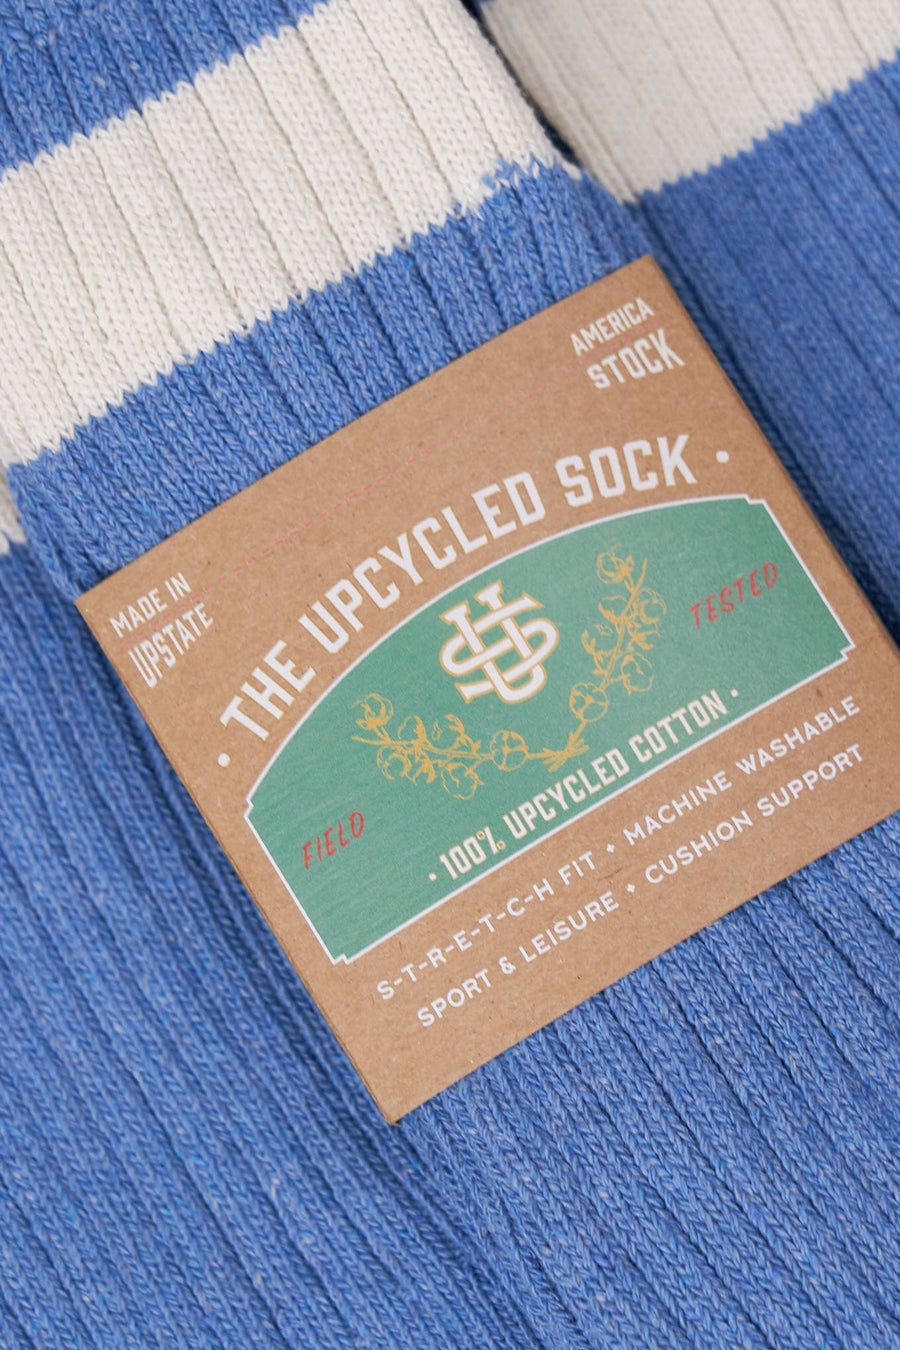 The Upcycled Sock: BLACK